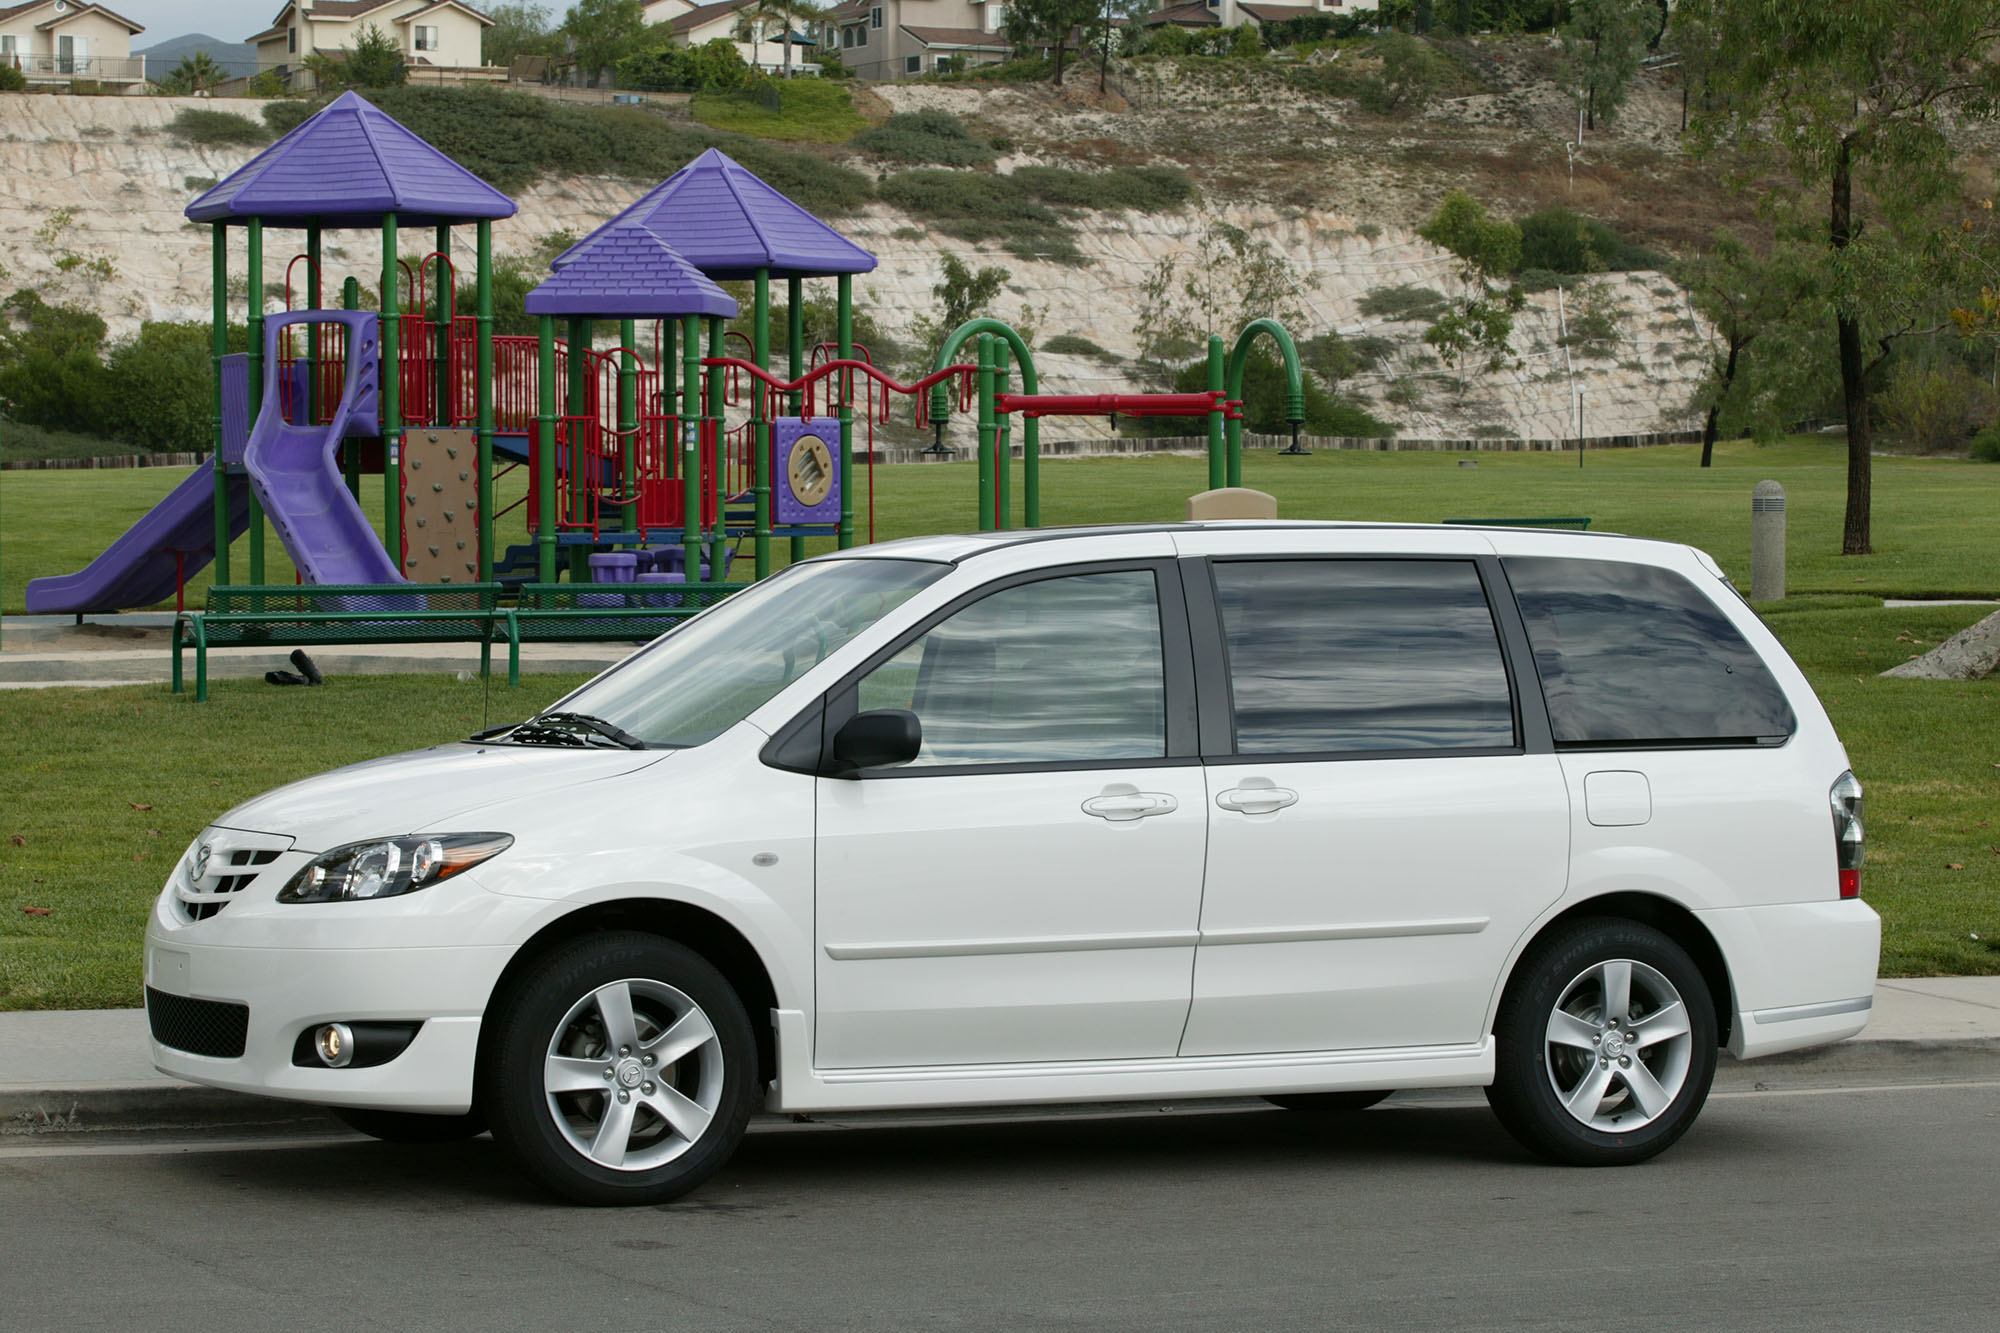 2005 Mazda MPV in white parked in front of a playground.